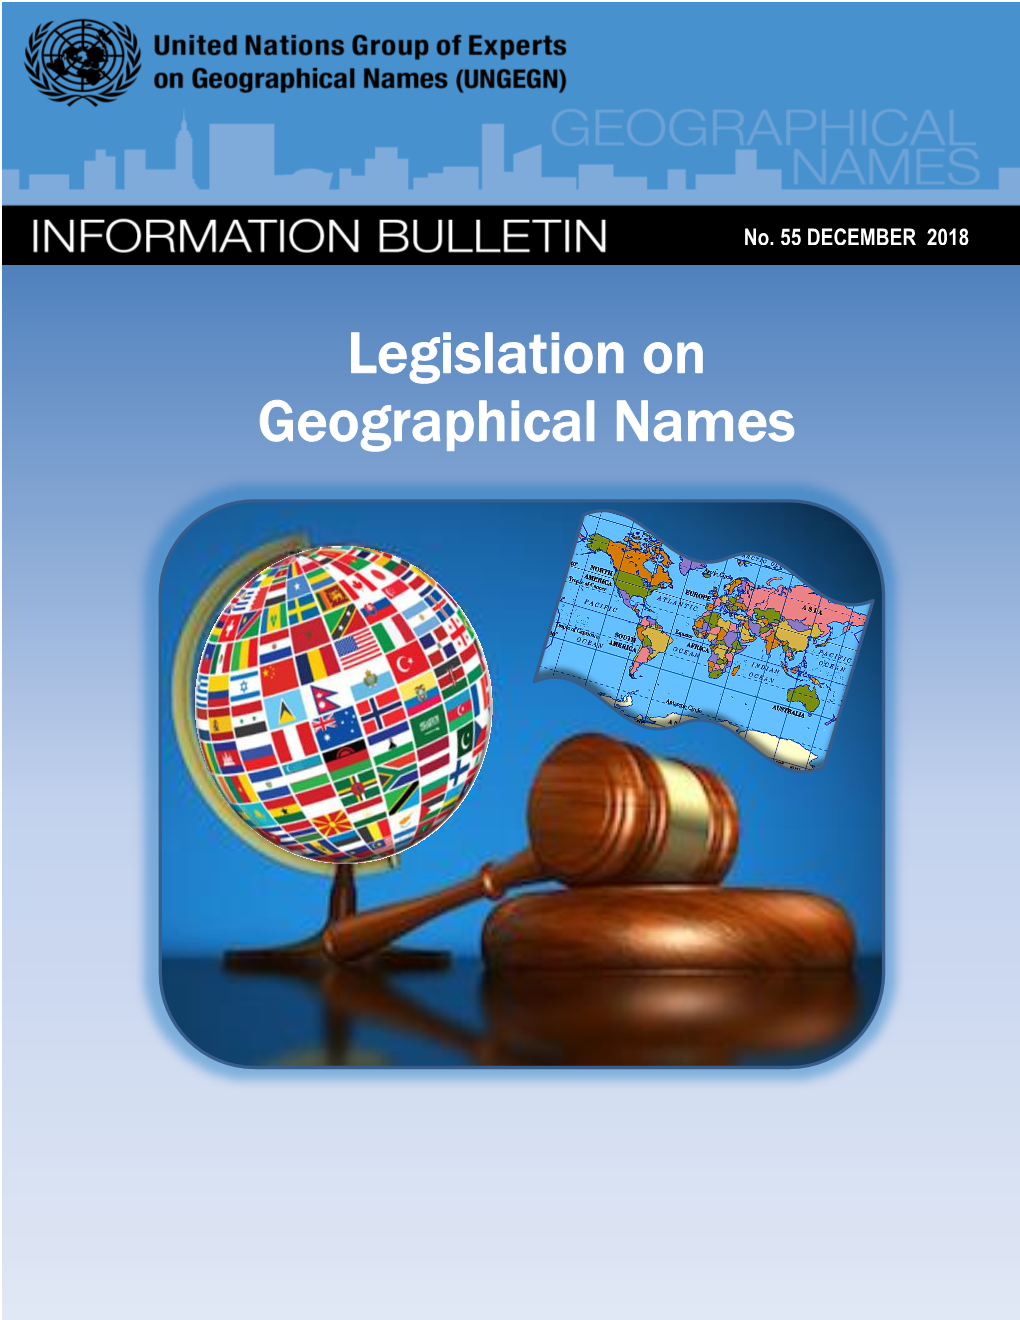 Legislation on Geographical Names in and the UNGEGN Working Group on Publicity and Funding